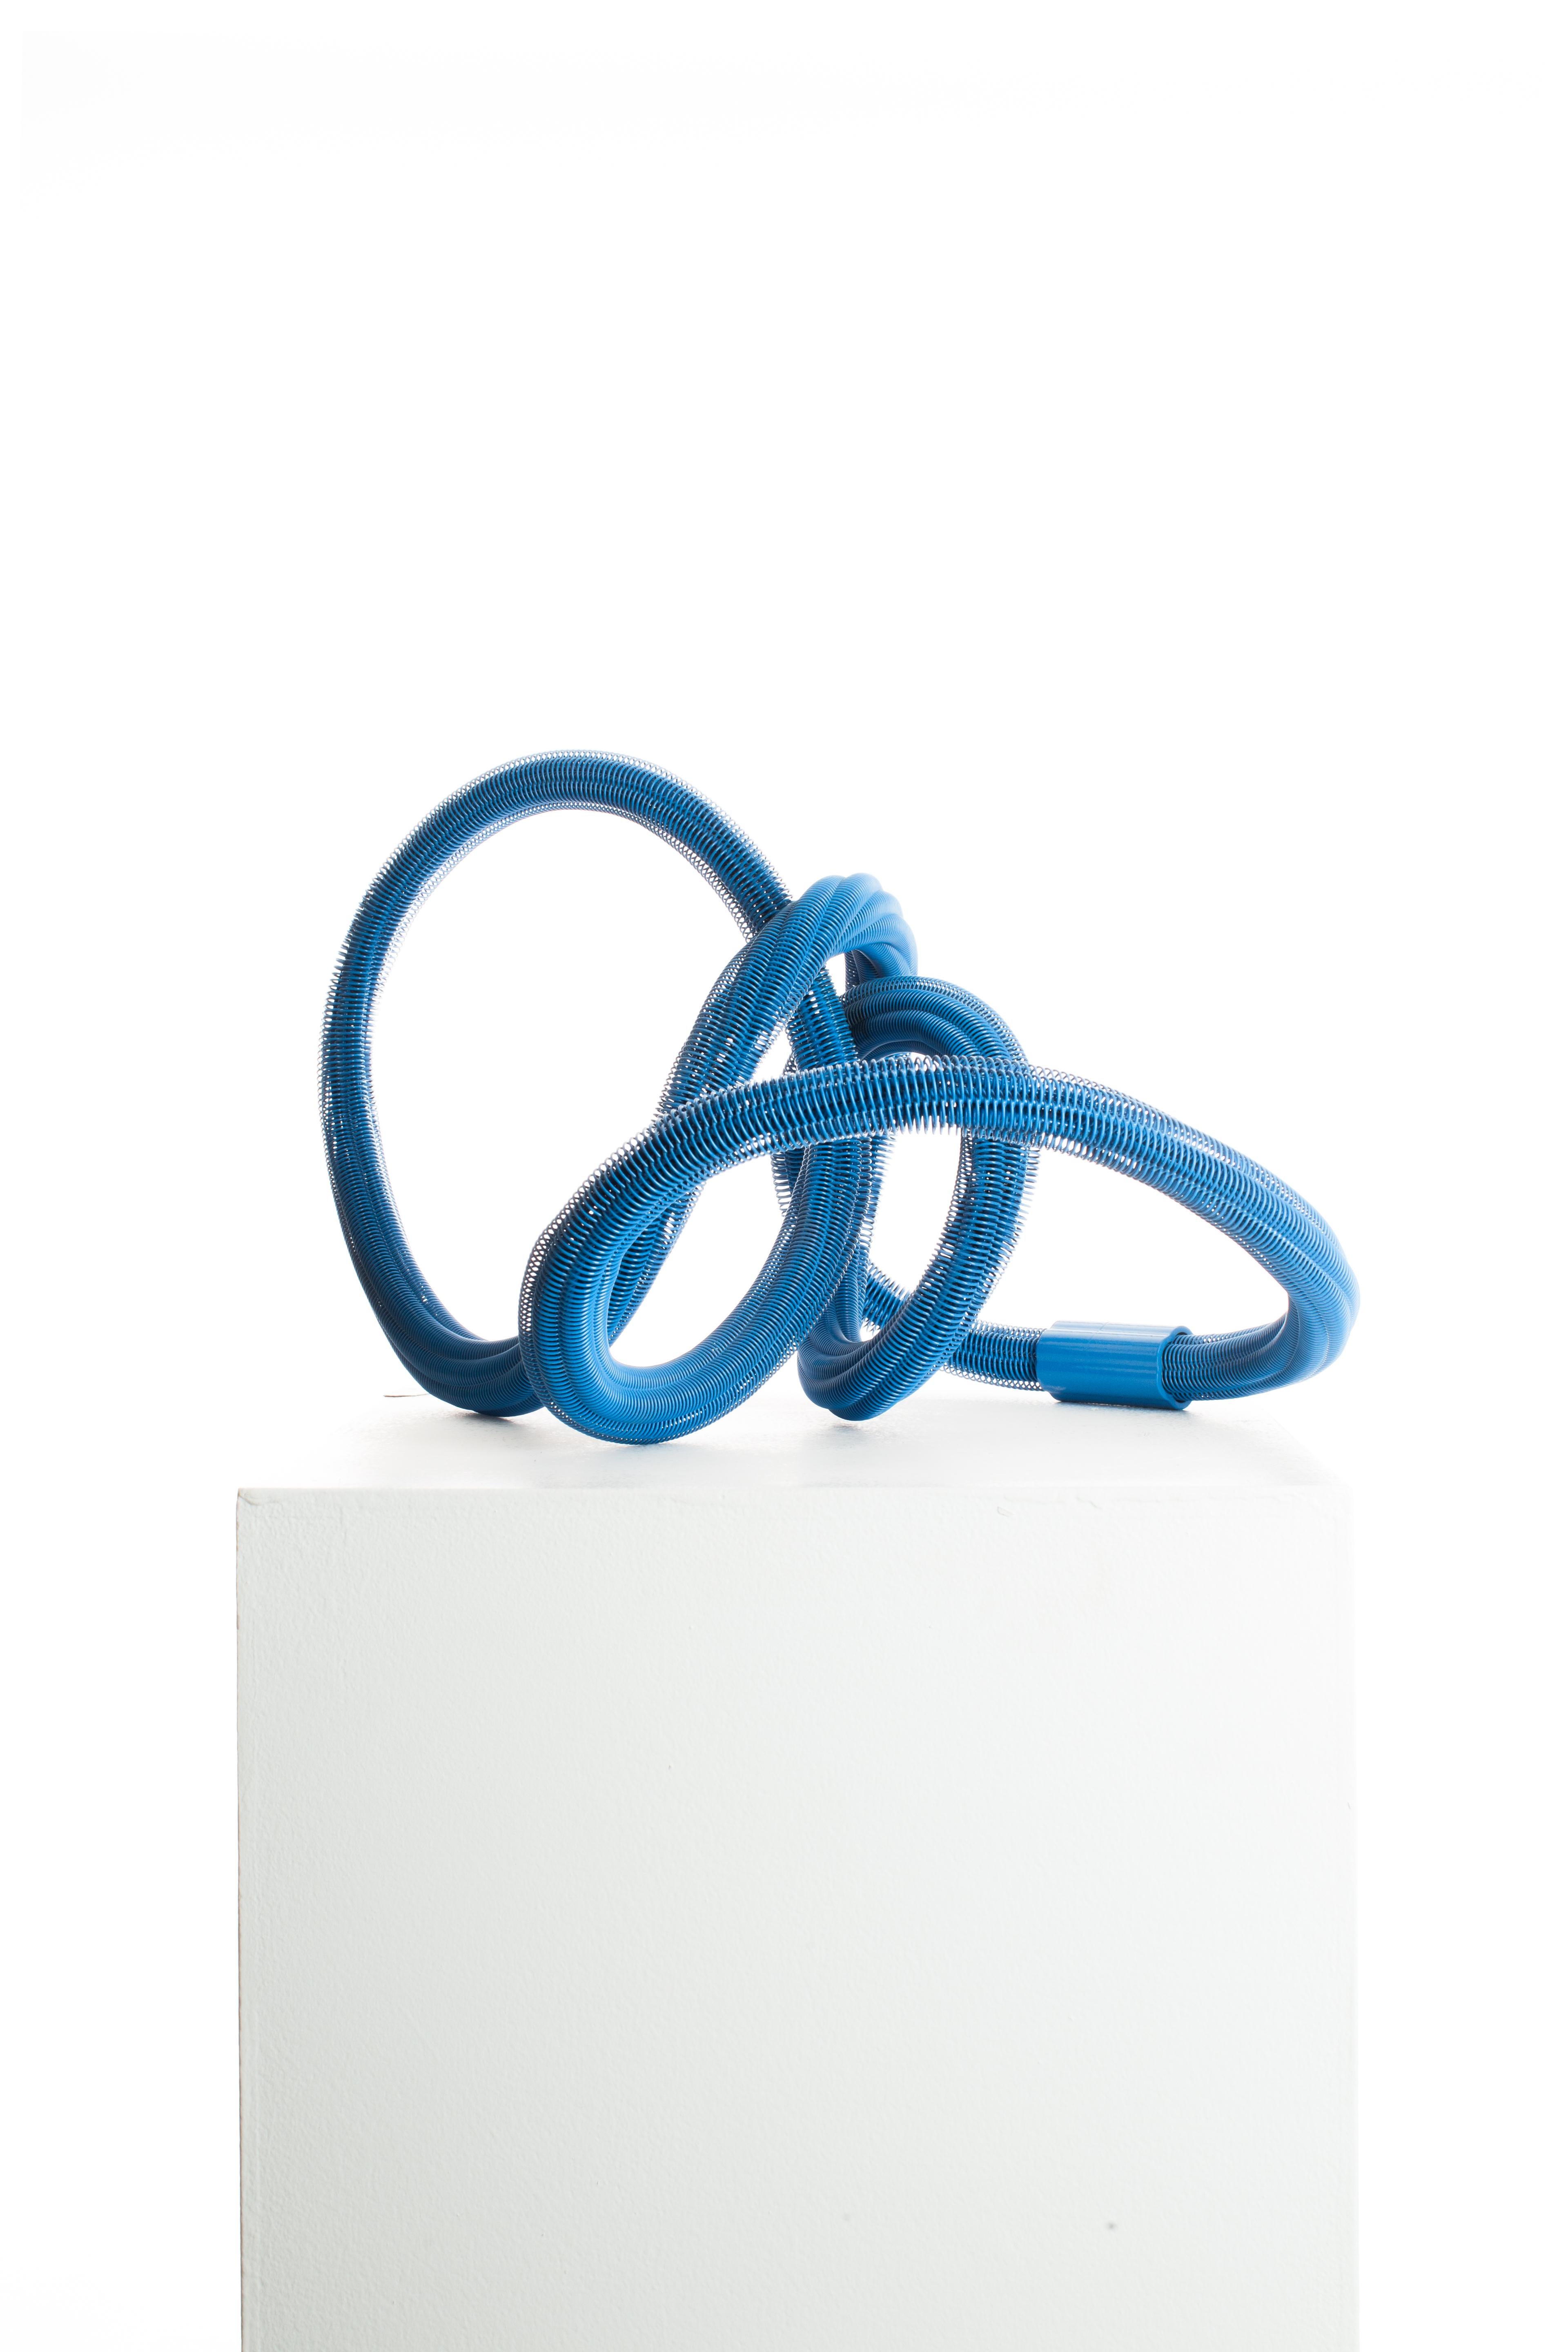 Blue, Powder Coating, Wire, Steel, Abstract, Contemporary, Modern, Sculpture For Sale 1